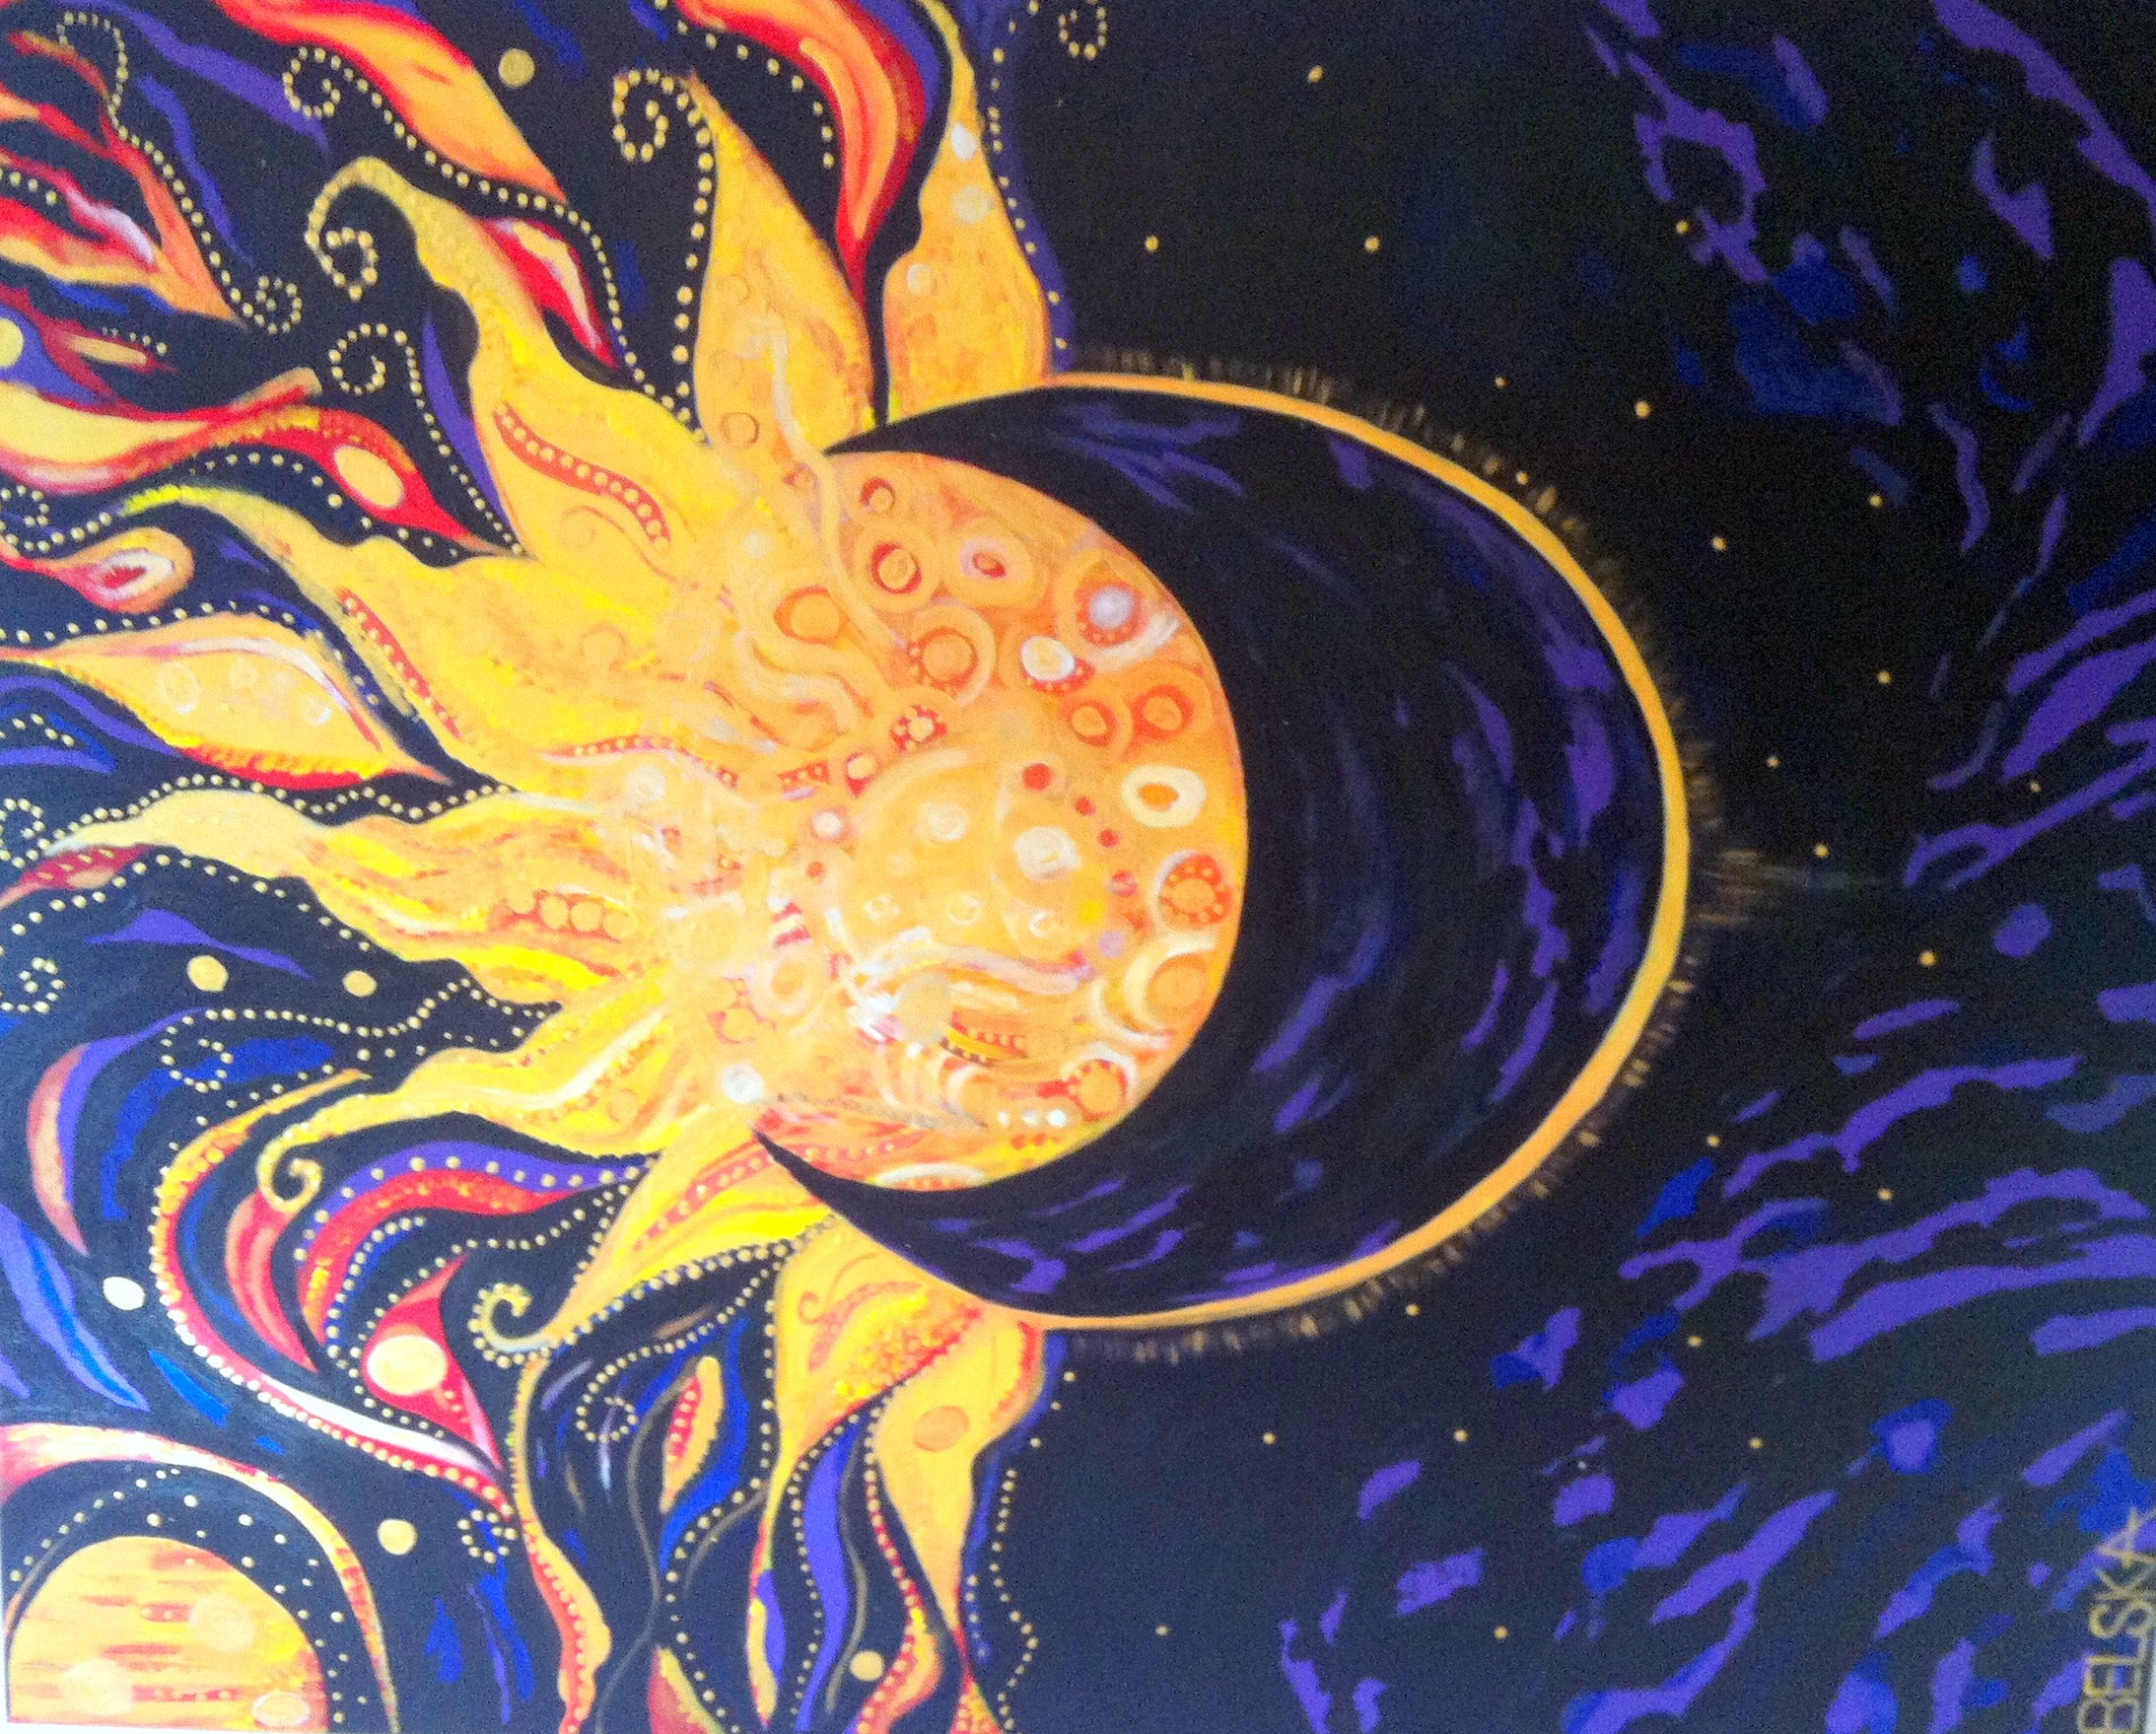 2187x1759 painting of the sun | Paintings (Originals) For Sale | "Sun Moon Eclipse